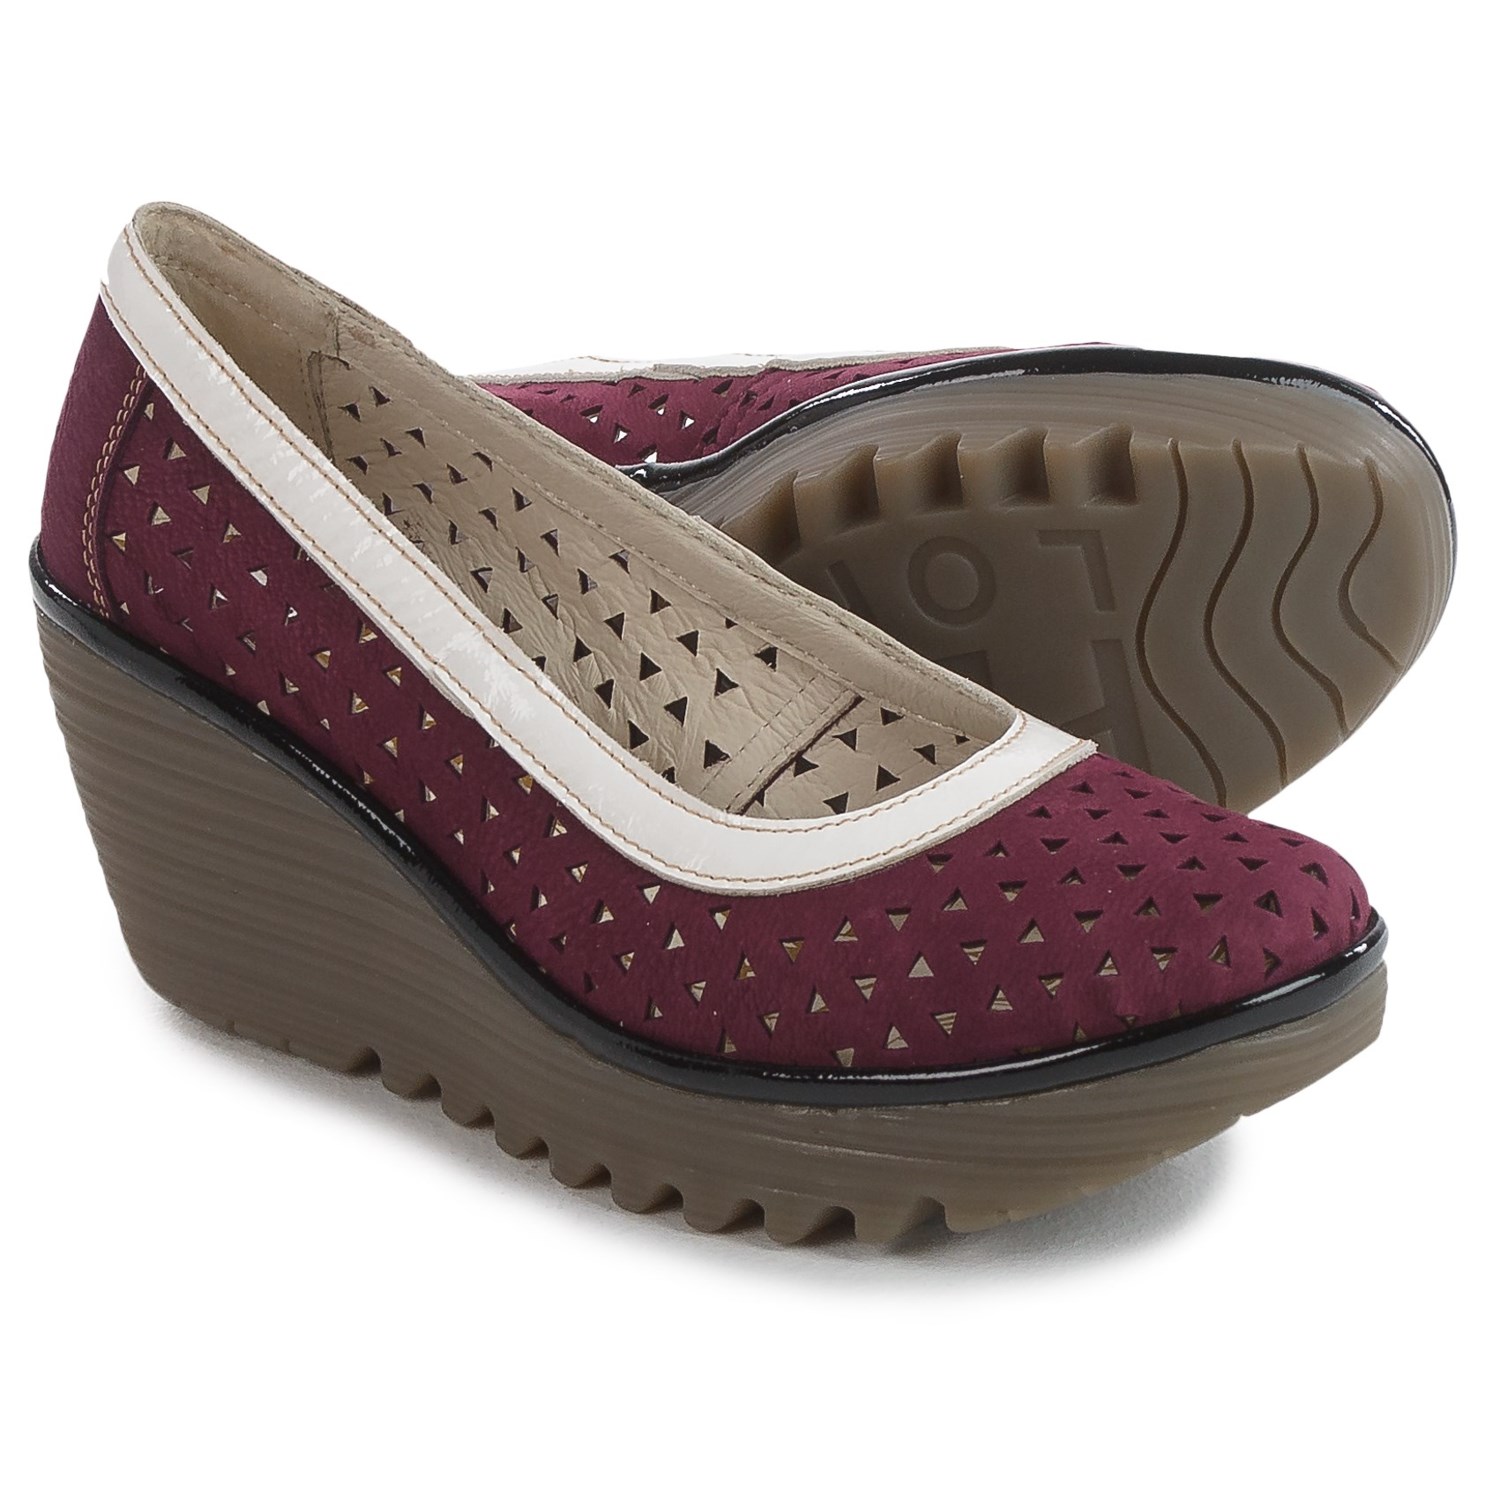 Fly London Yare Shoes (For Women) - Save 74%